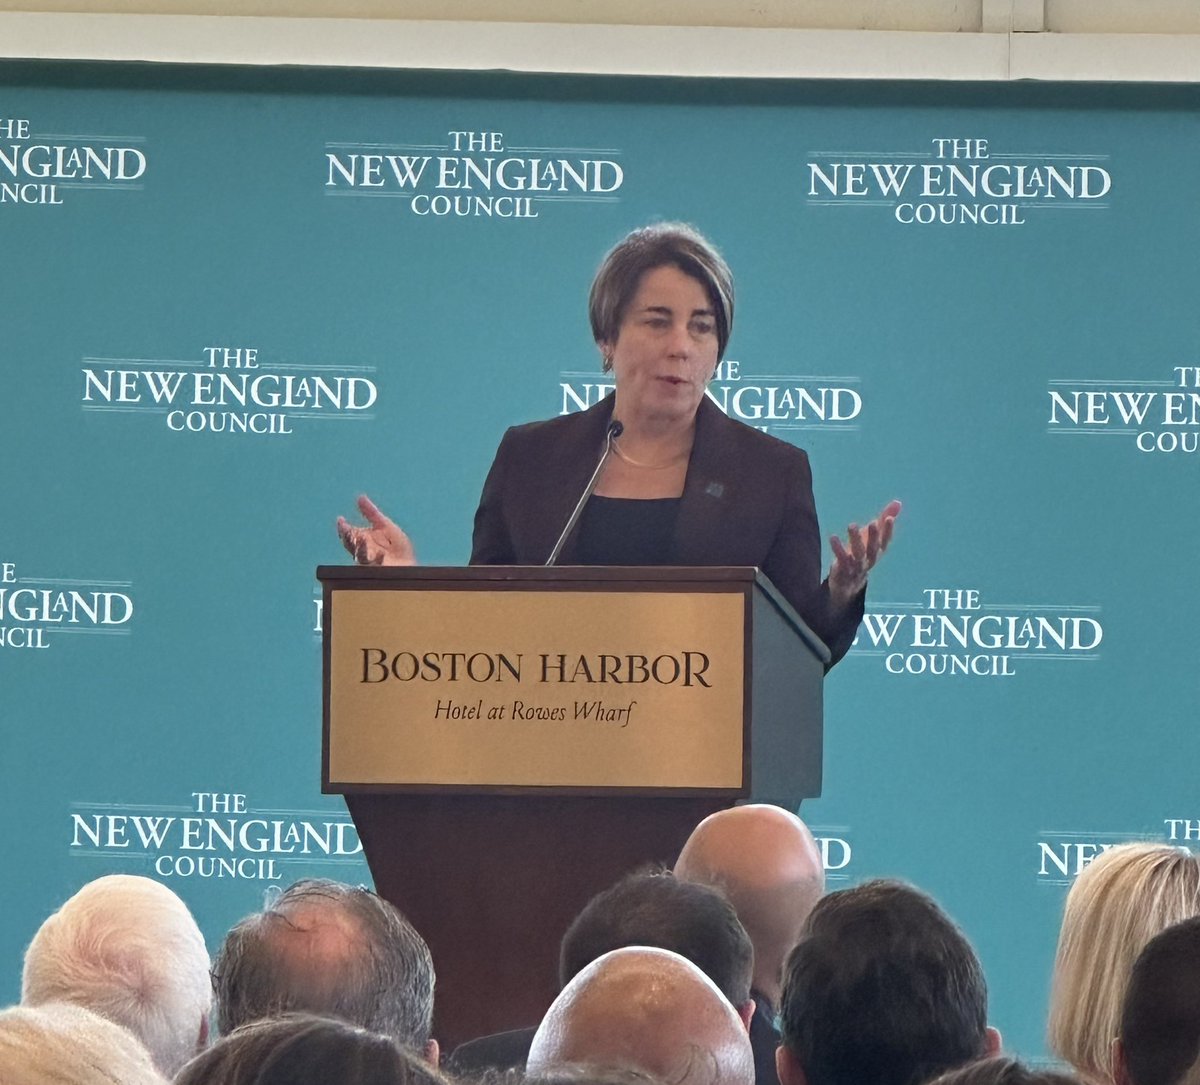 It’s a packed room at the @NECouncil breakfast with @MassGovernor Maura Healey. Looking forward to her remarks.